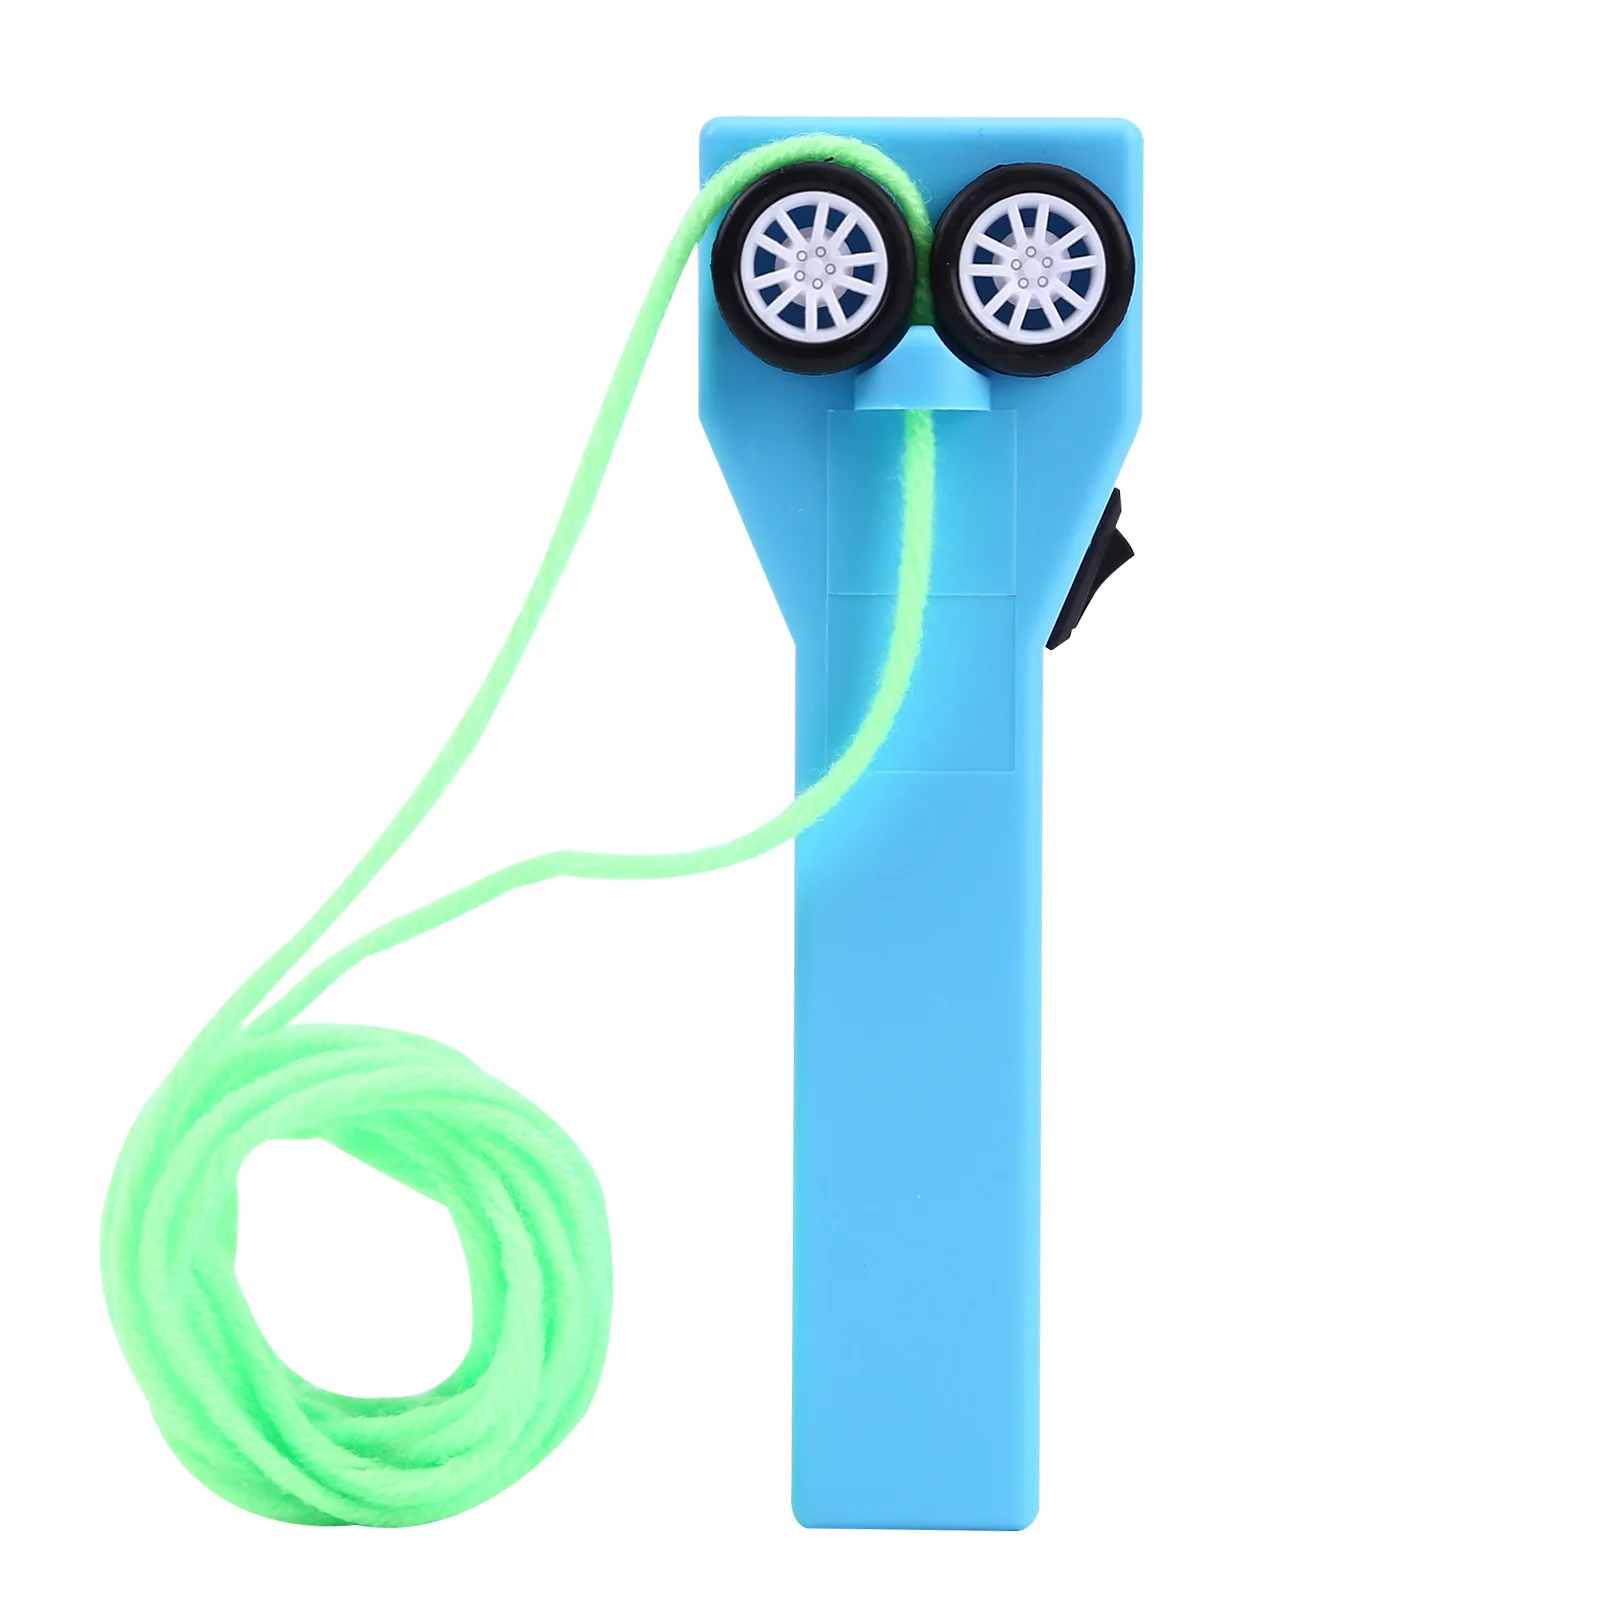 Hand Held Fun Electric Toy for All Ages Rope Launcher LPDM String Launcher Blue Tiktok Creative Zip String Controller Rope Thruster Propeller